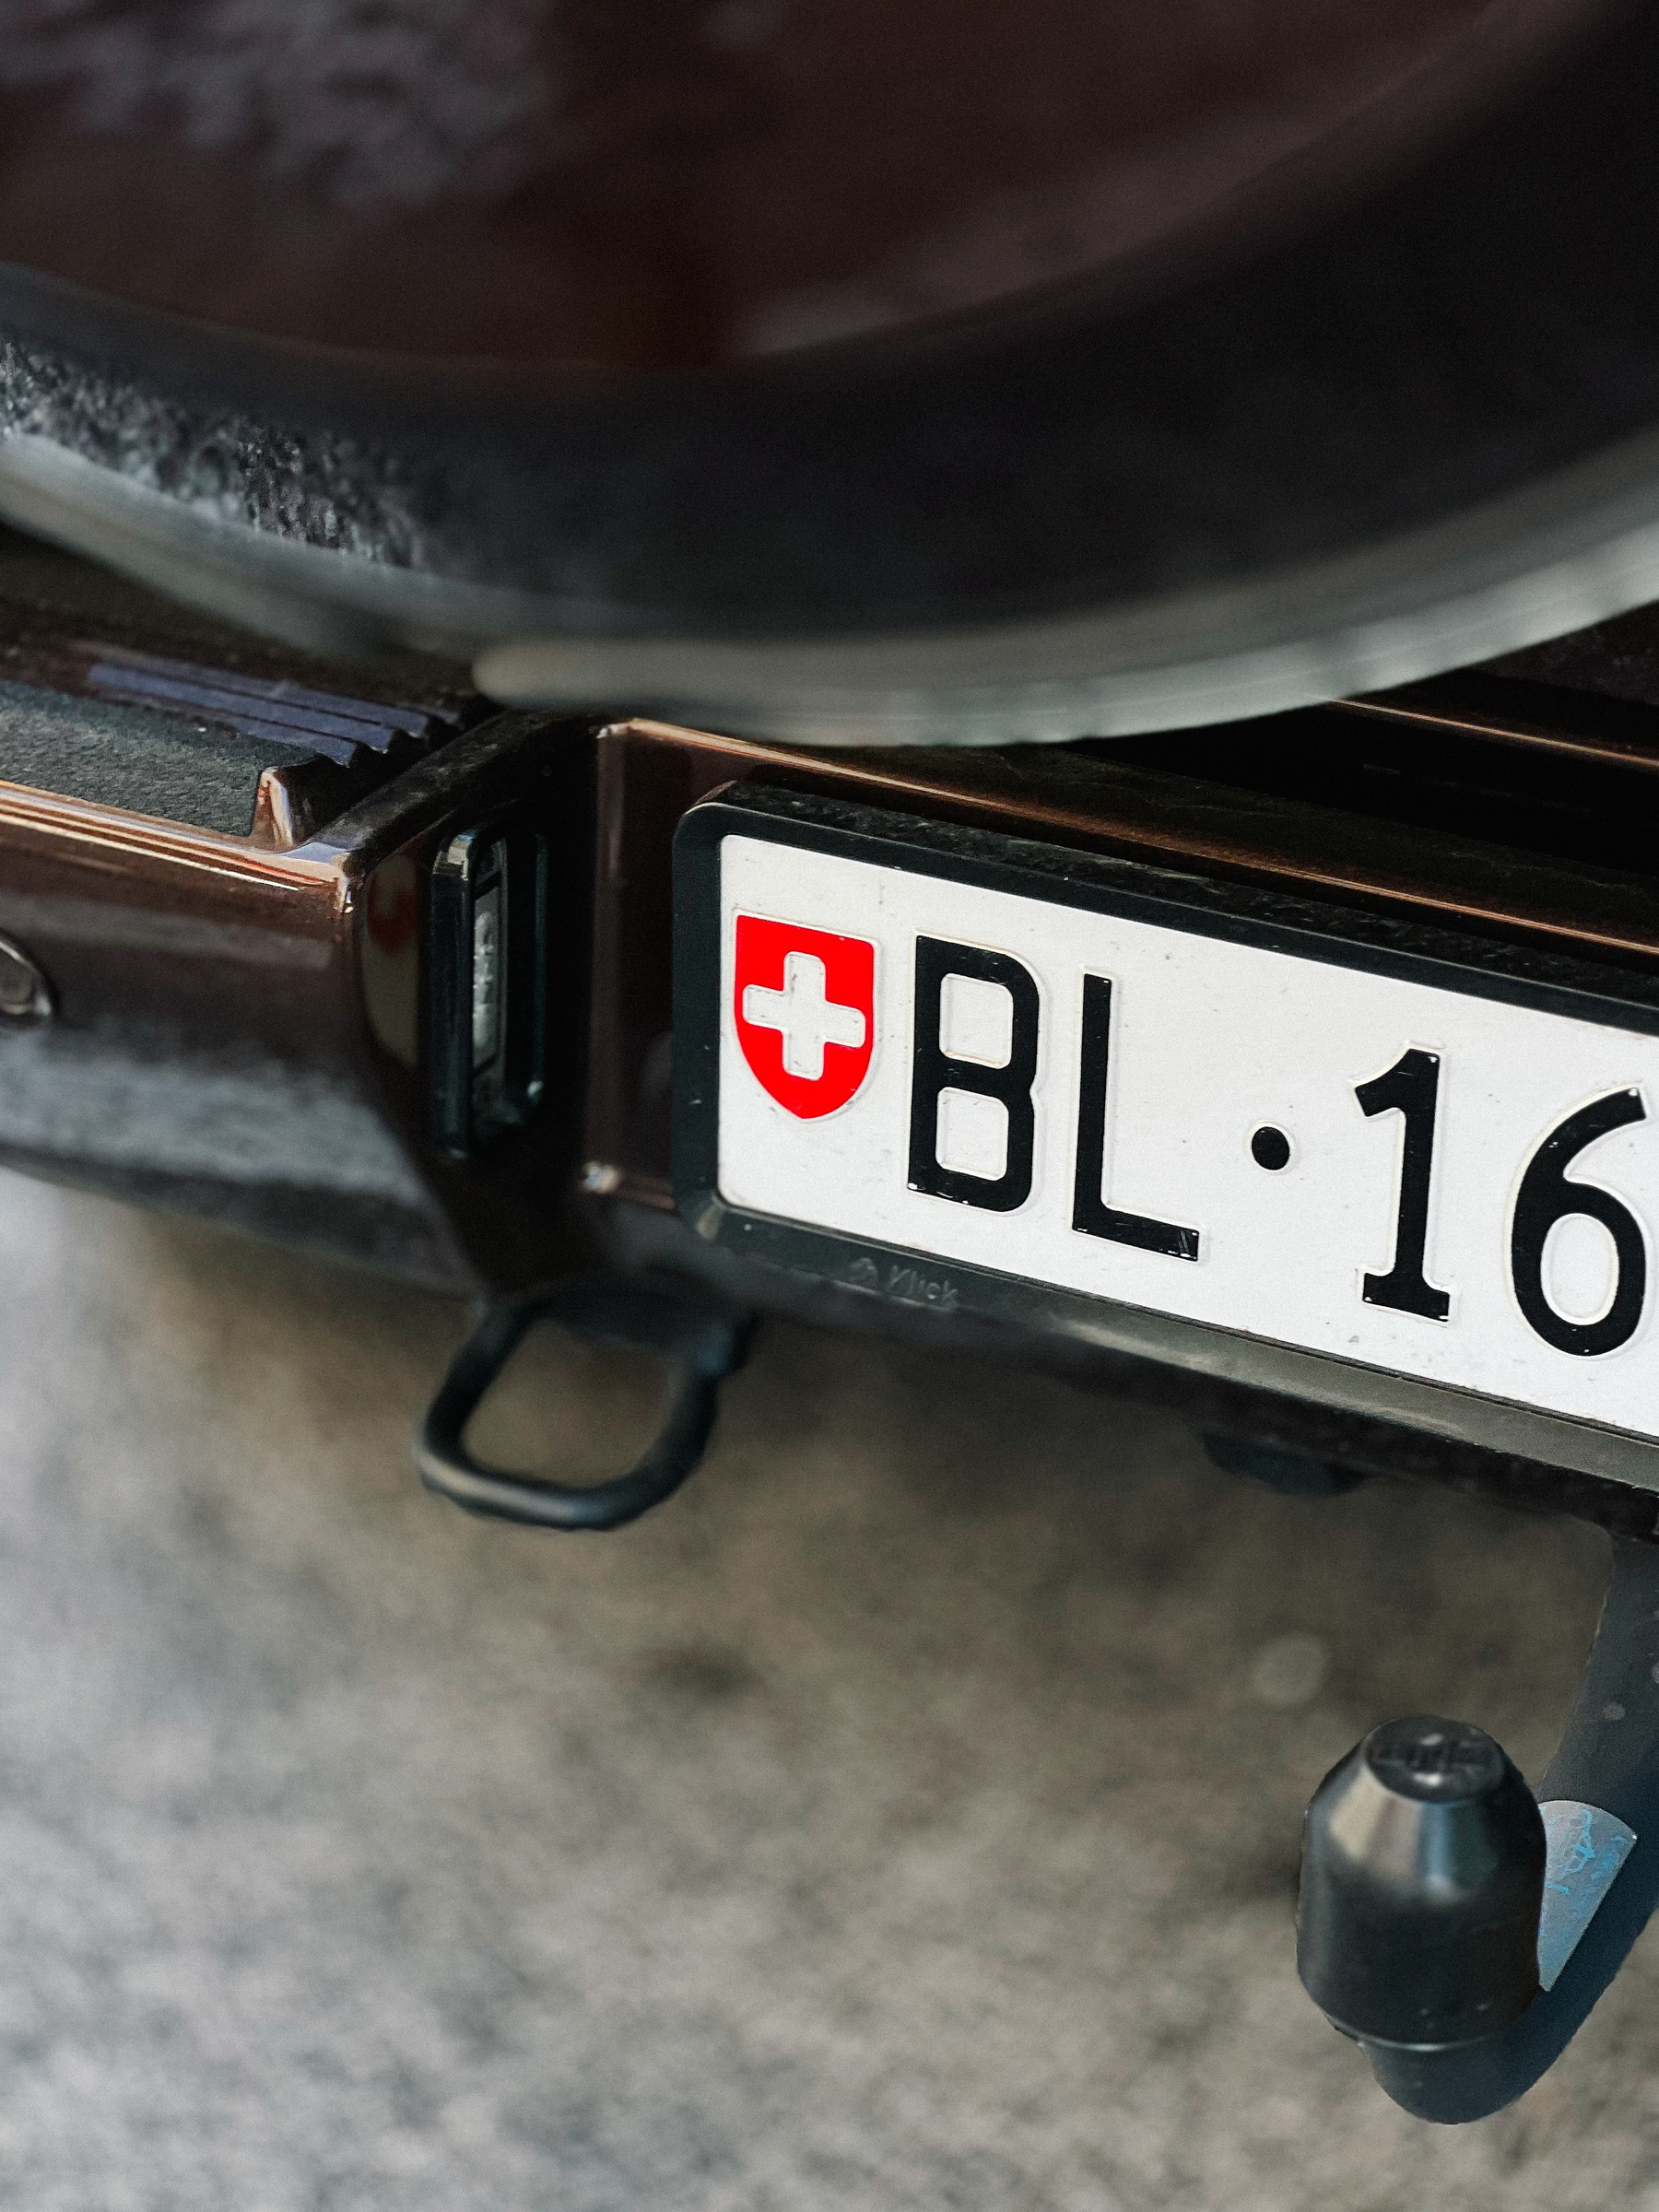 Partial Swiss license plate.